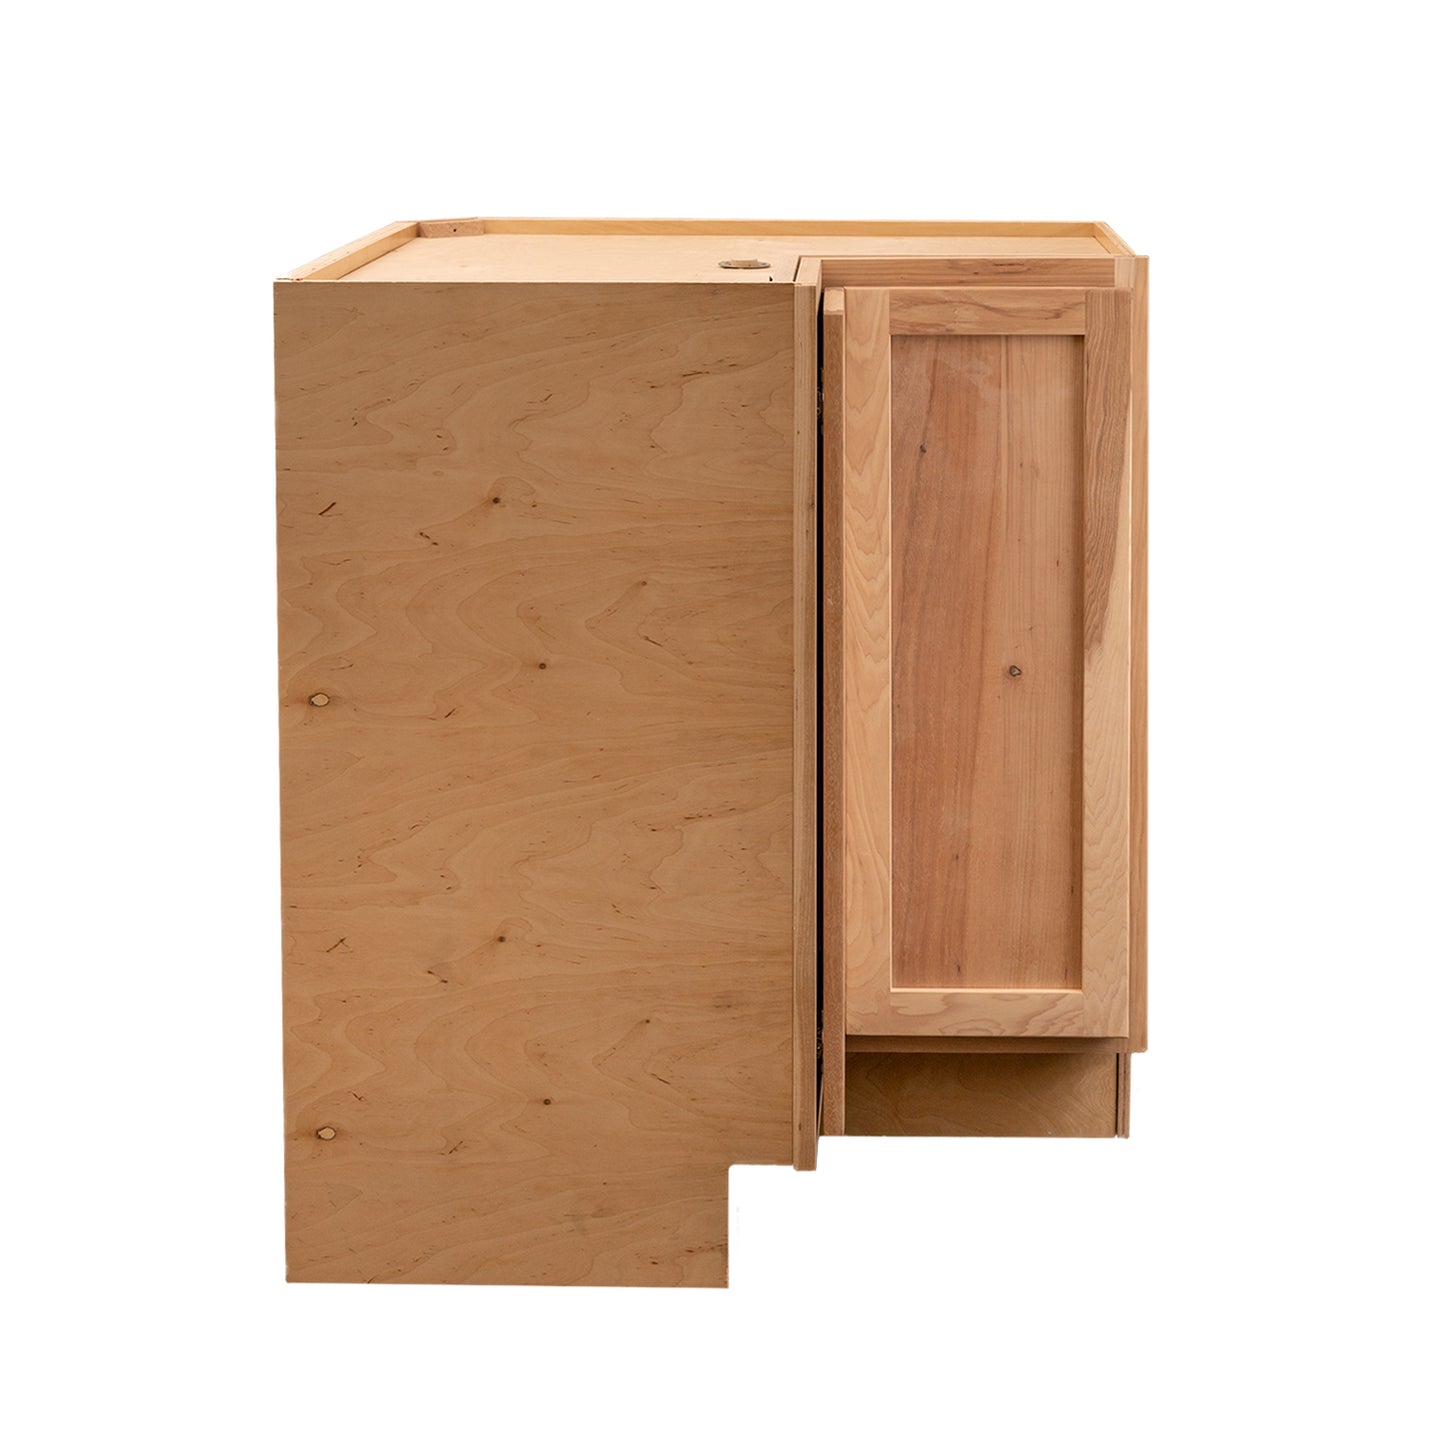 Quicklock RTA (Ready-to-Assemble) Raw Hickory Lazy Susan Cabinet